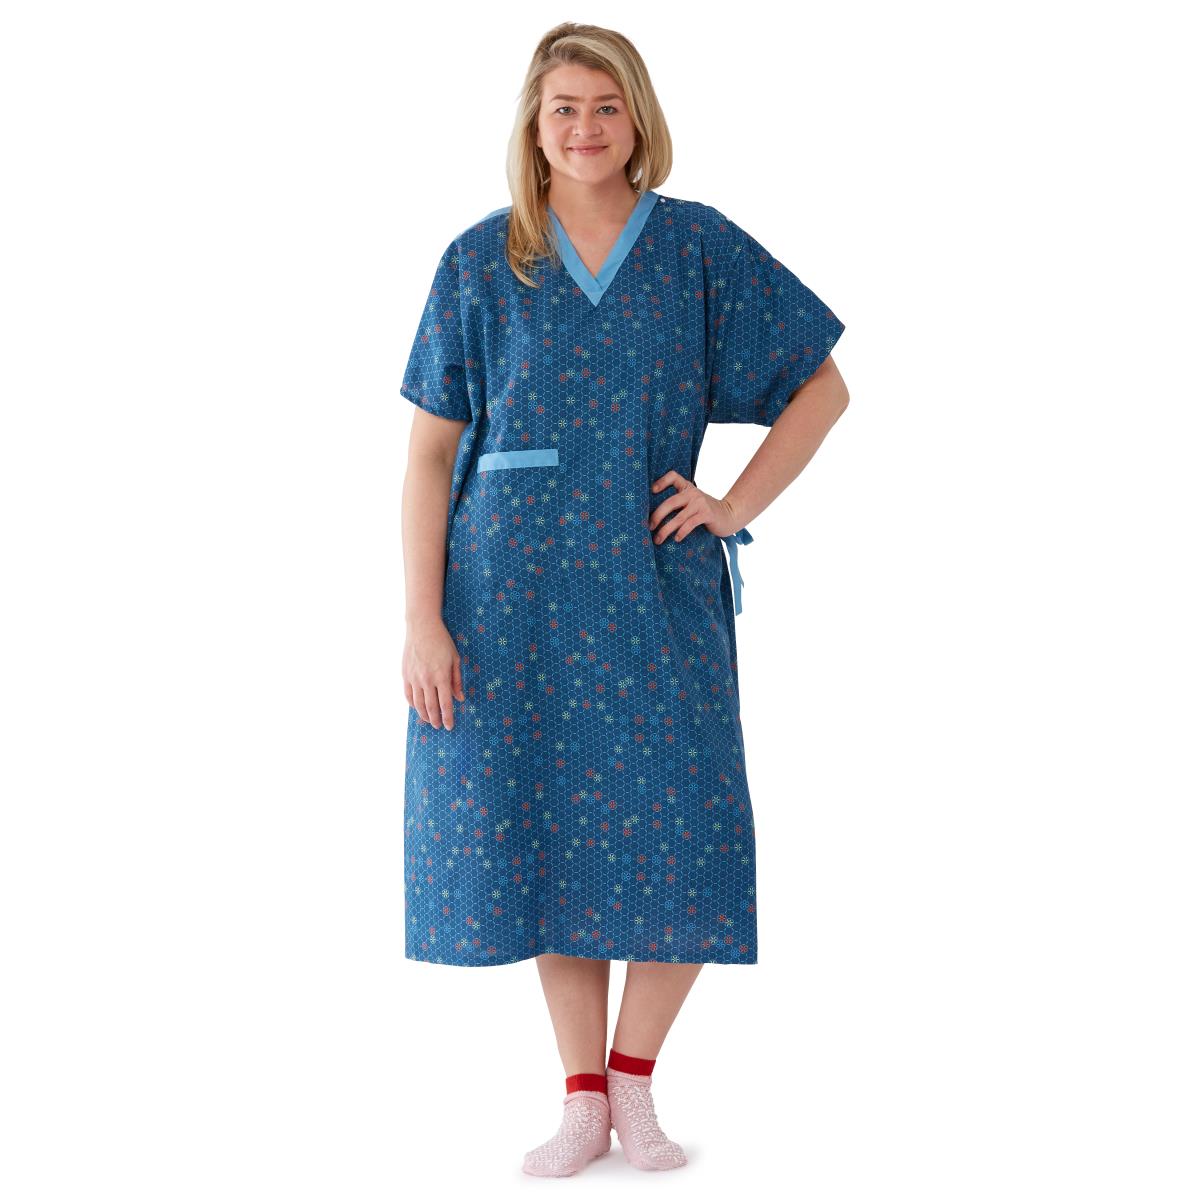 Patient Exam - Disposable Gowns & Drapes - CSP Medical